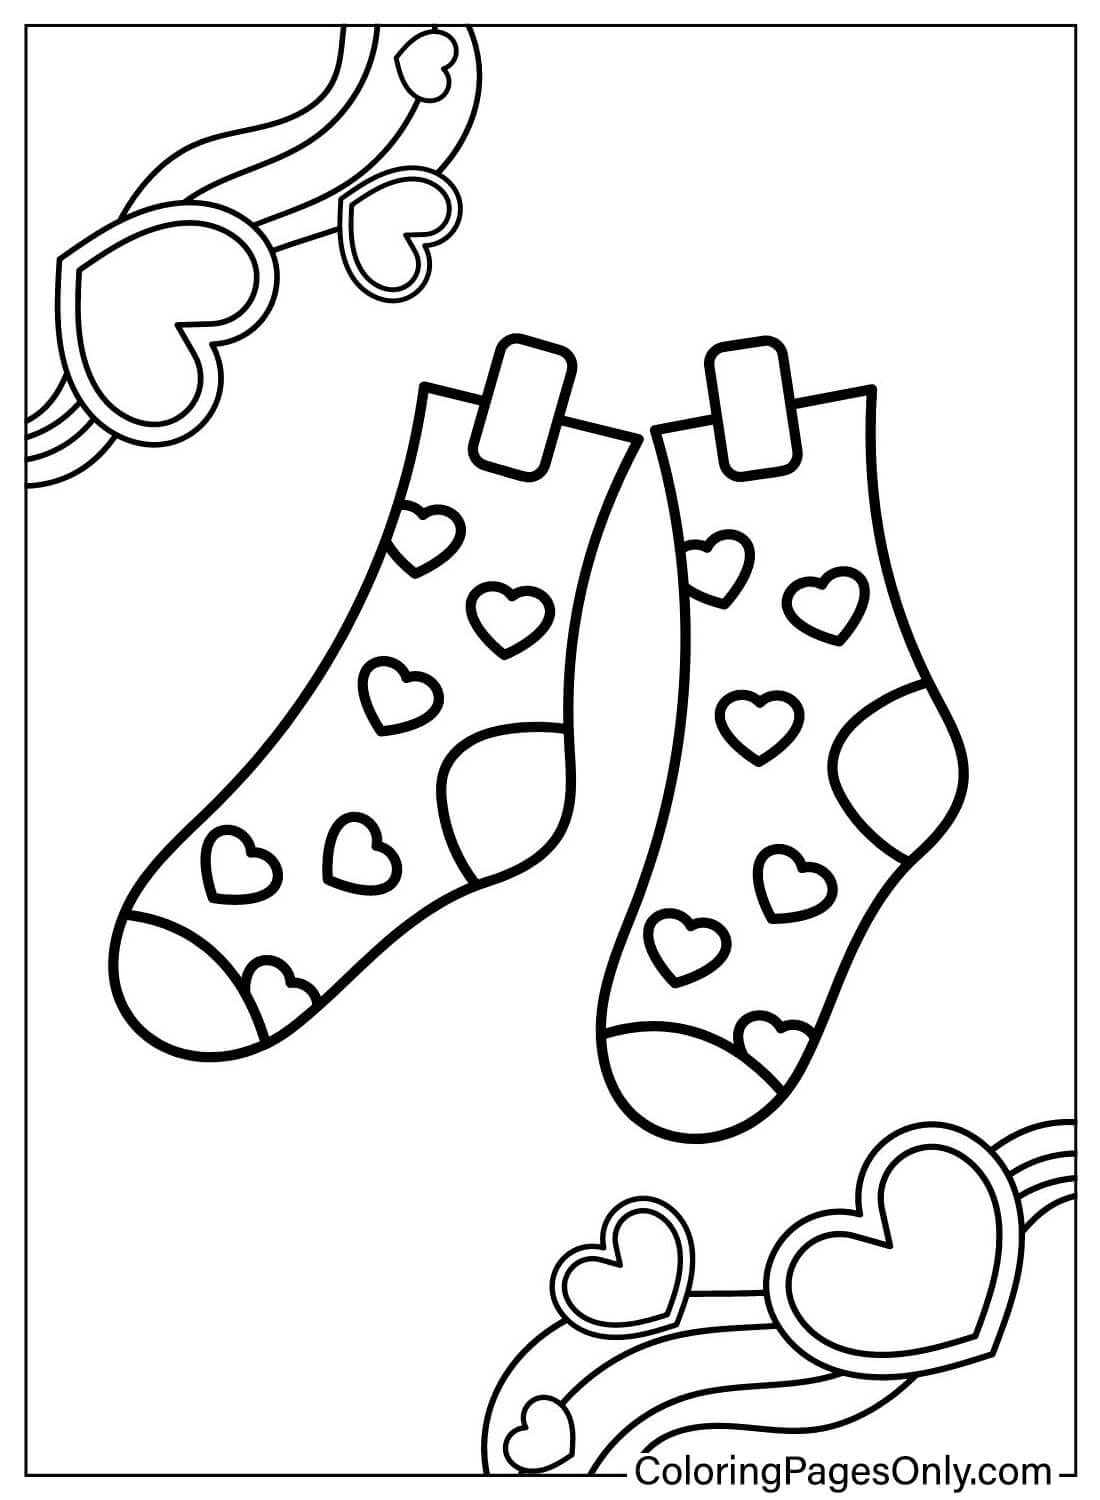 Download Socks Coloring Page from Socks